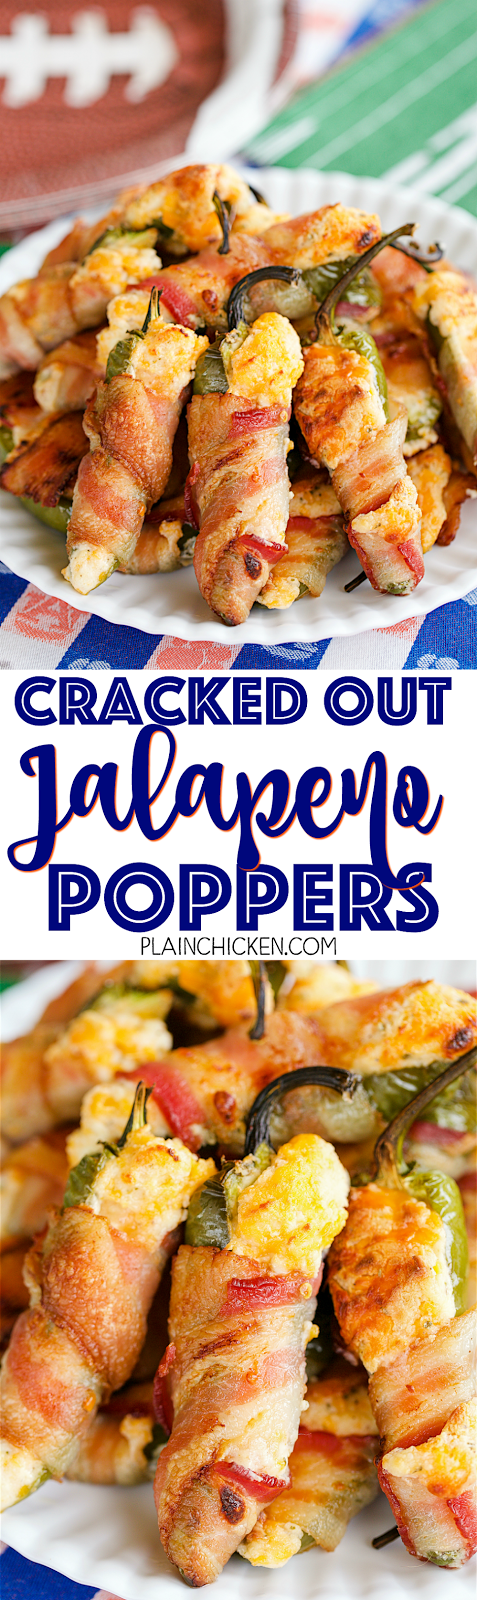 Cracked Out Jalapeño Poppers | Plain Chicken